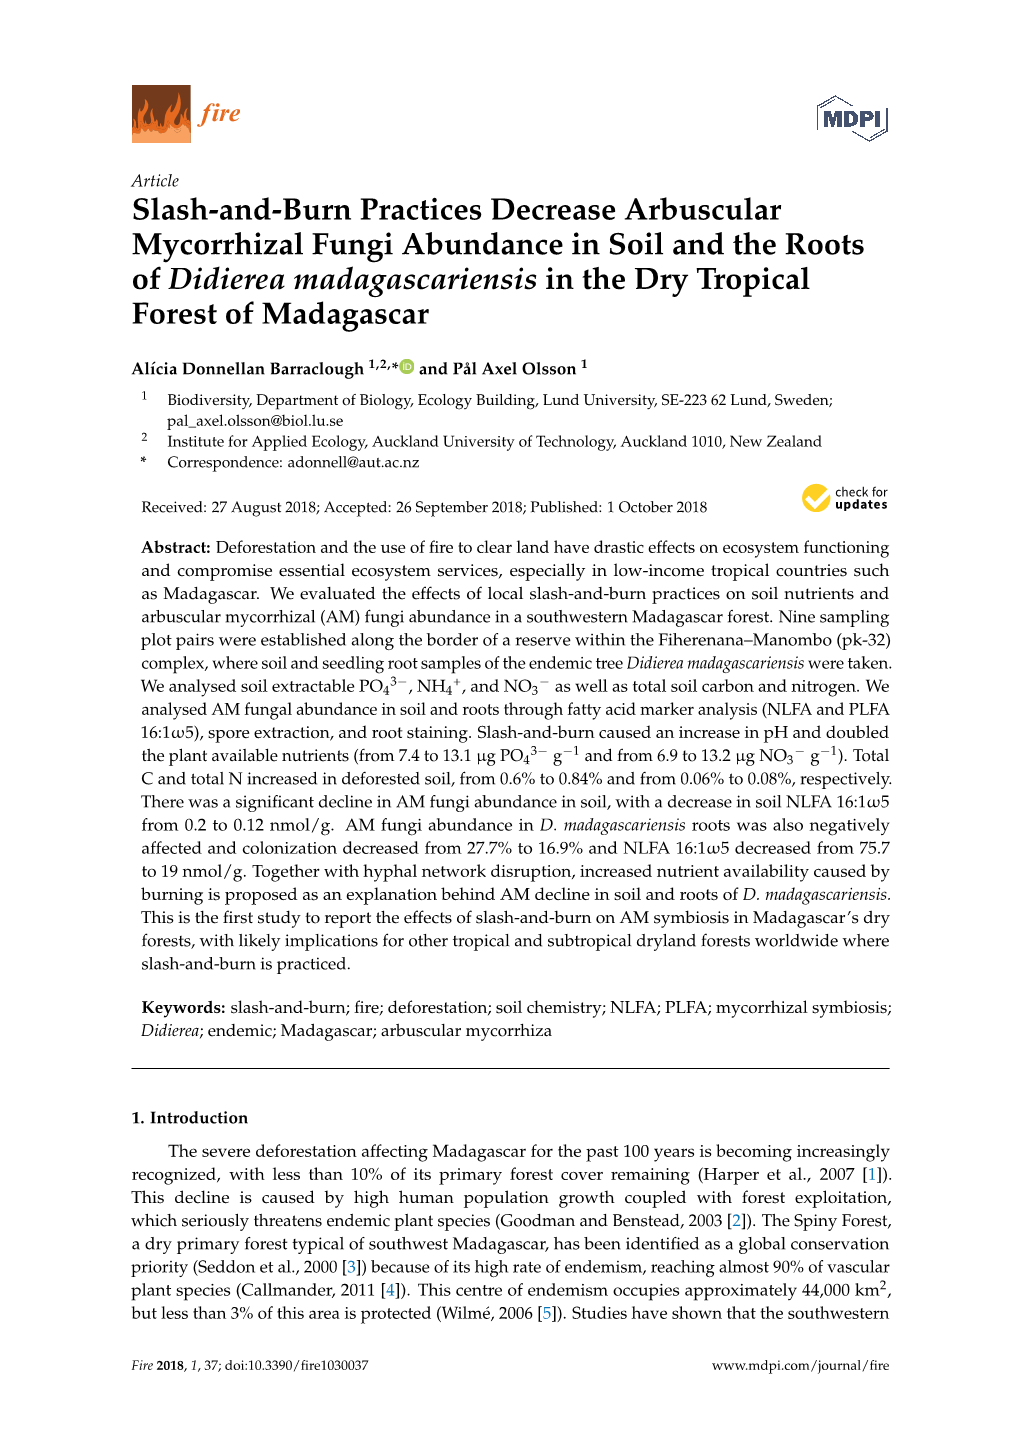 Slash-And-Burn Practices Decrease Arbuscular Mycorrhizal Fungi Abundance in Soil and the Roots of Didierea Madagascariensis in the Dry Tropical Forest of Madagascar